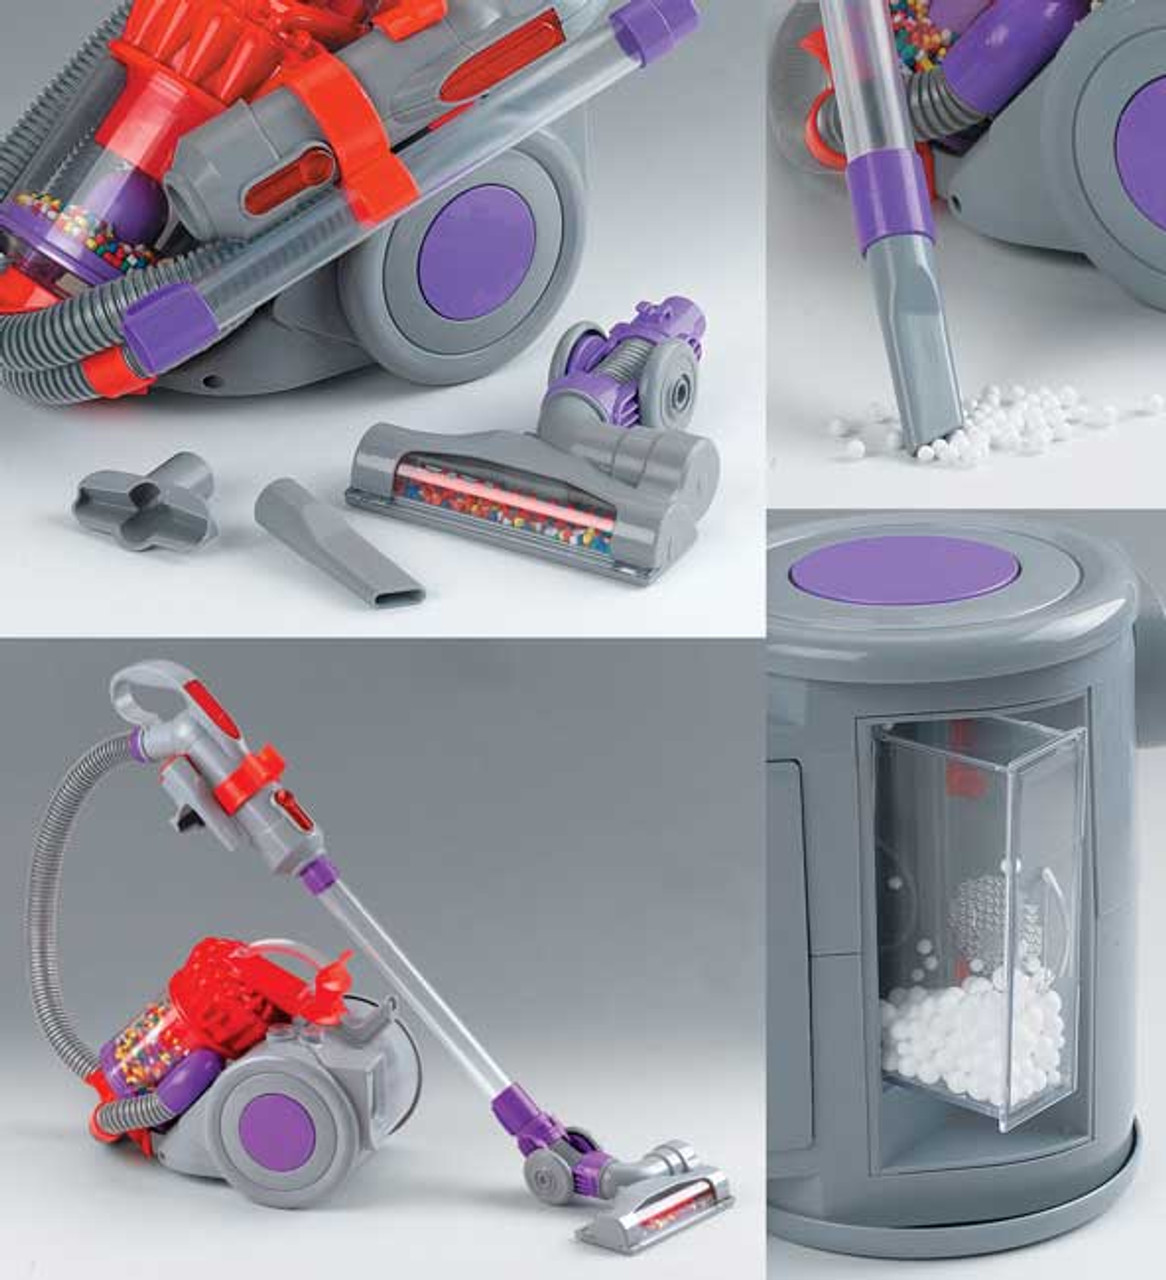 DYSON BALL VACUUM CLEANER NEW KIDS TOY CASDON DC24